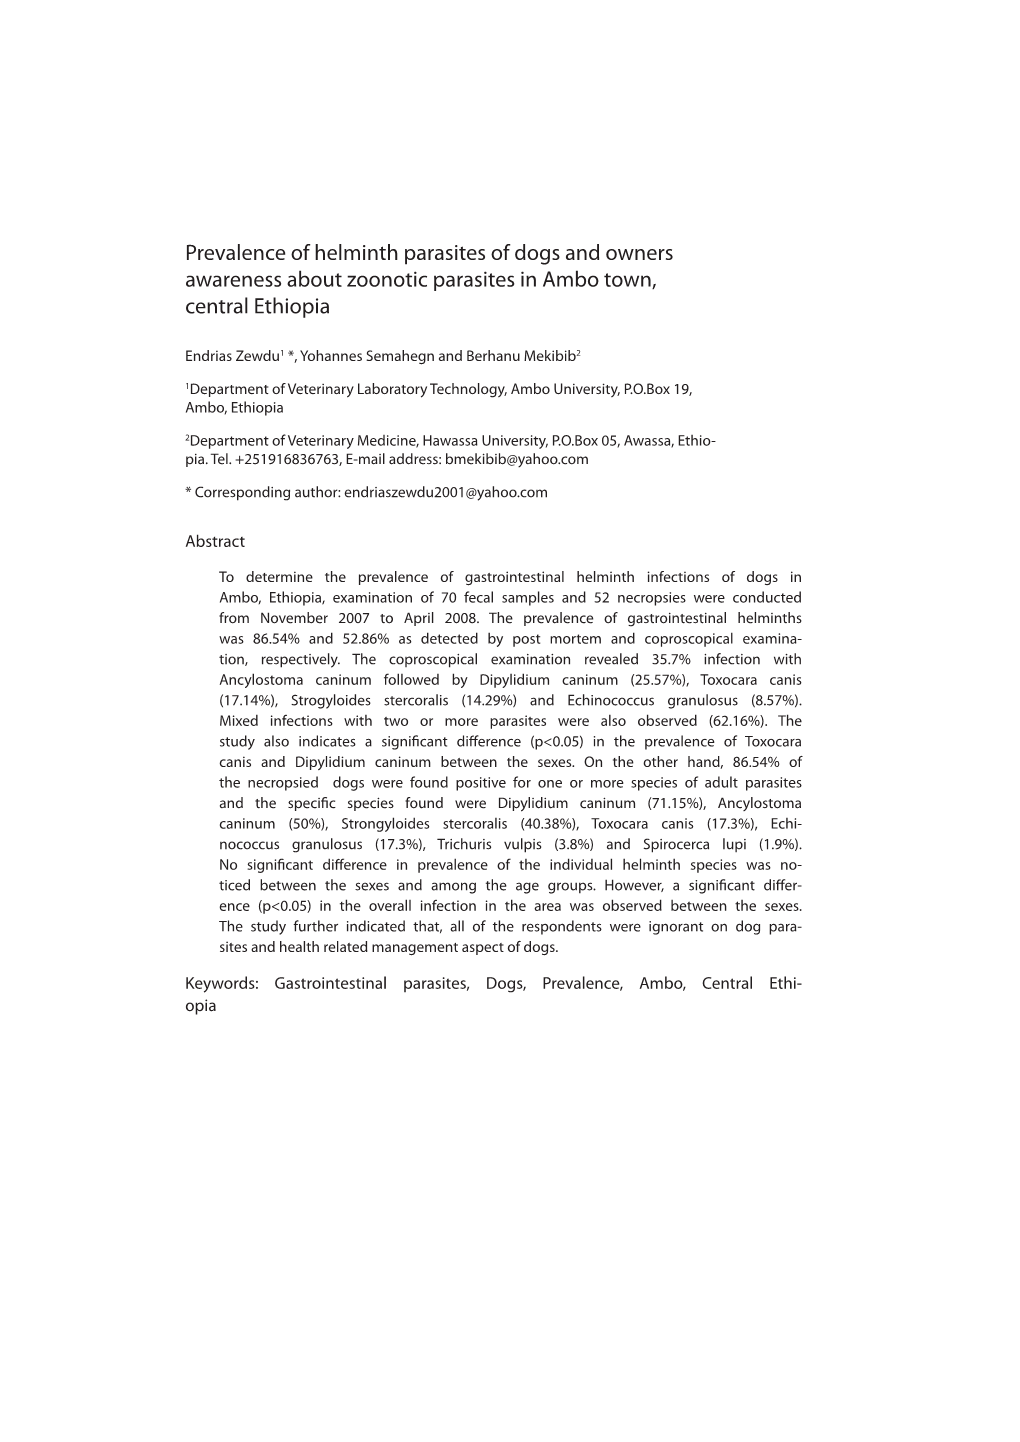 Prevalence of Helminth Parasites of Dogs and Owners Awareness About Zoonotic Parasites in Ambo Town, Central Ethiopia